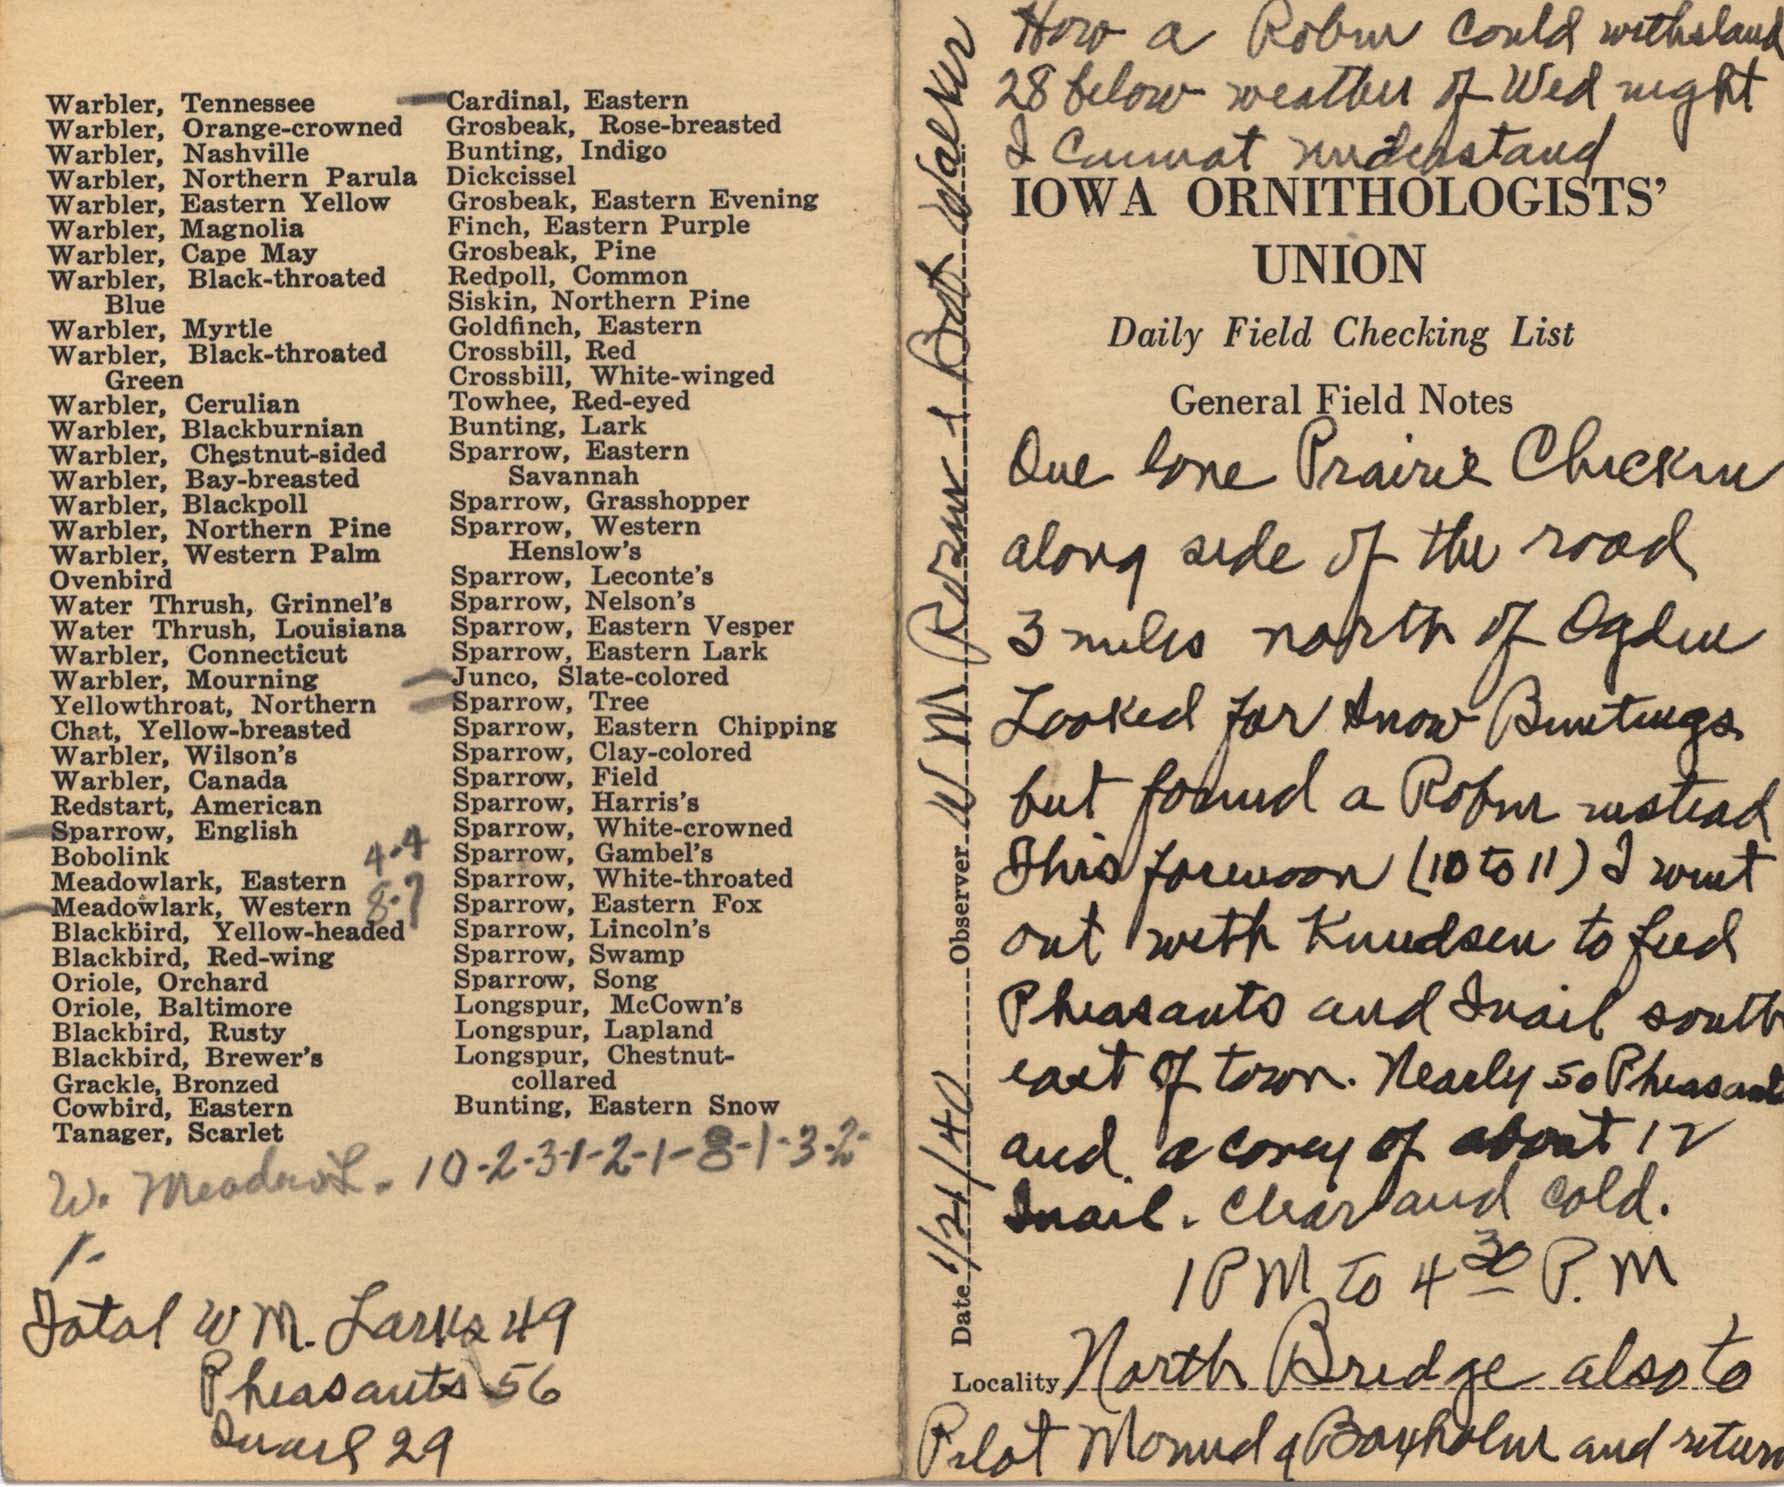 Daily field checking list by Walter Rosene, January 21, 1940